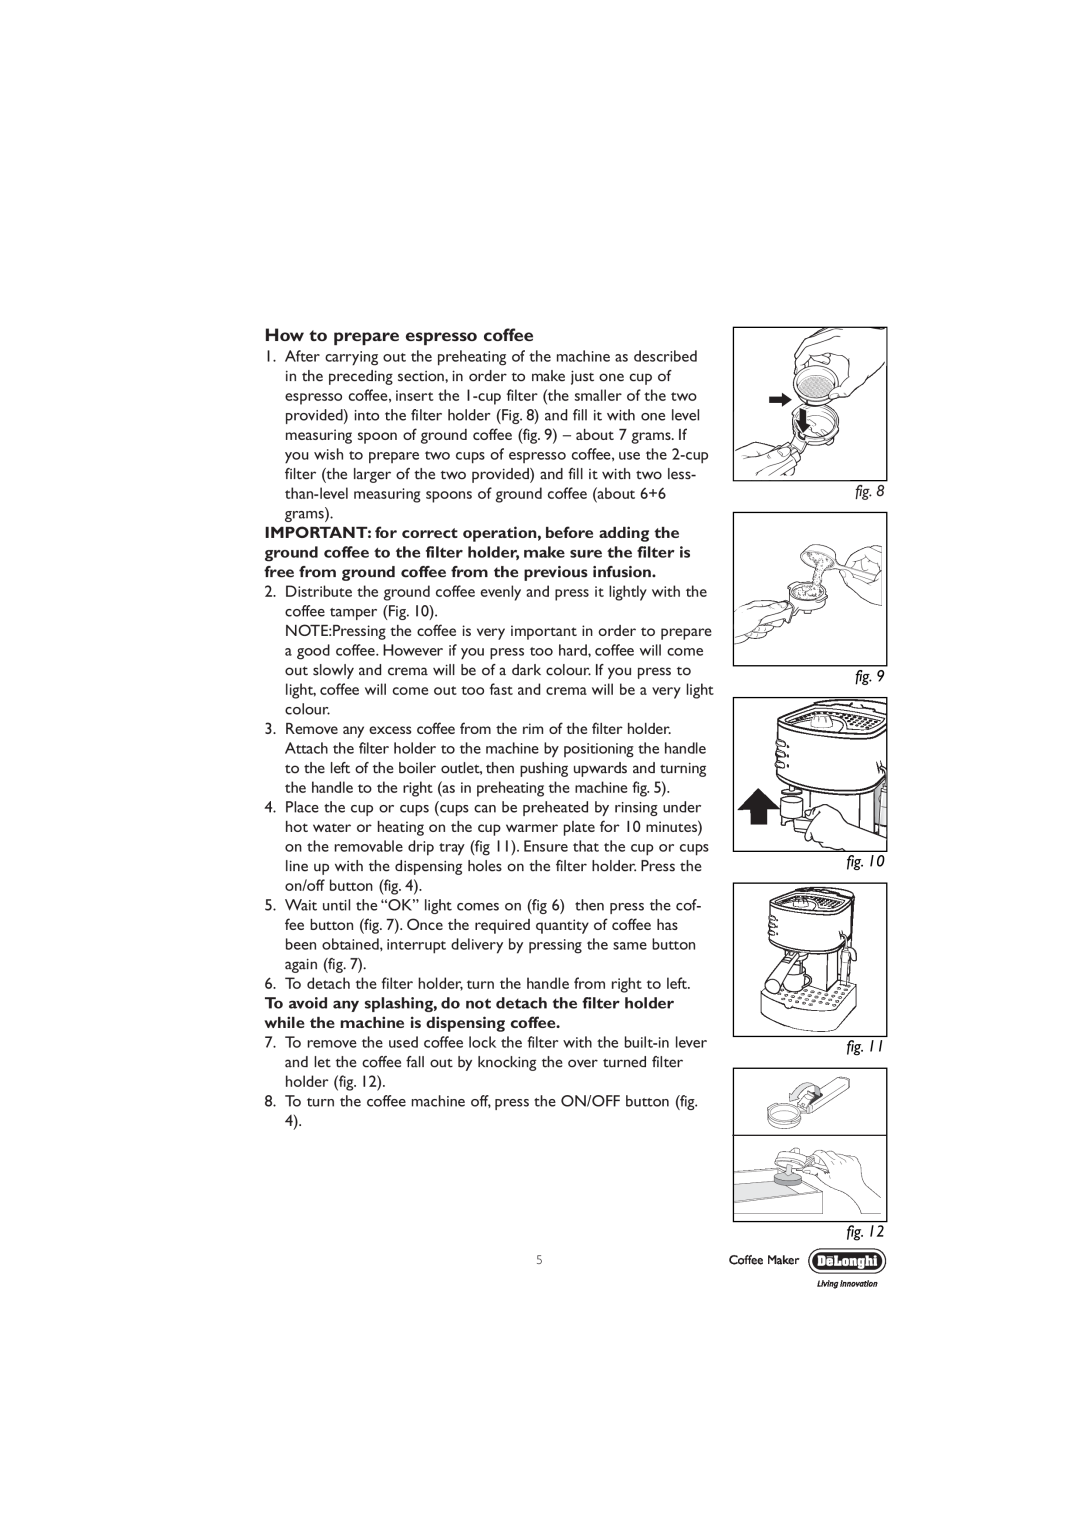 DeLonghi EC330 manual How to prepare espresso coffee, To detach the filter holder, turn the handle from right to left 